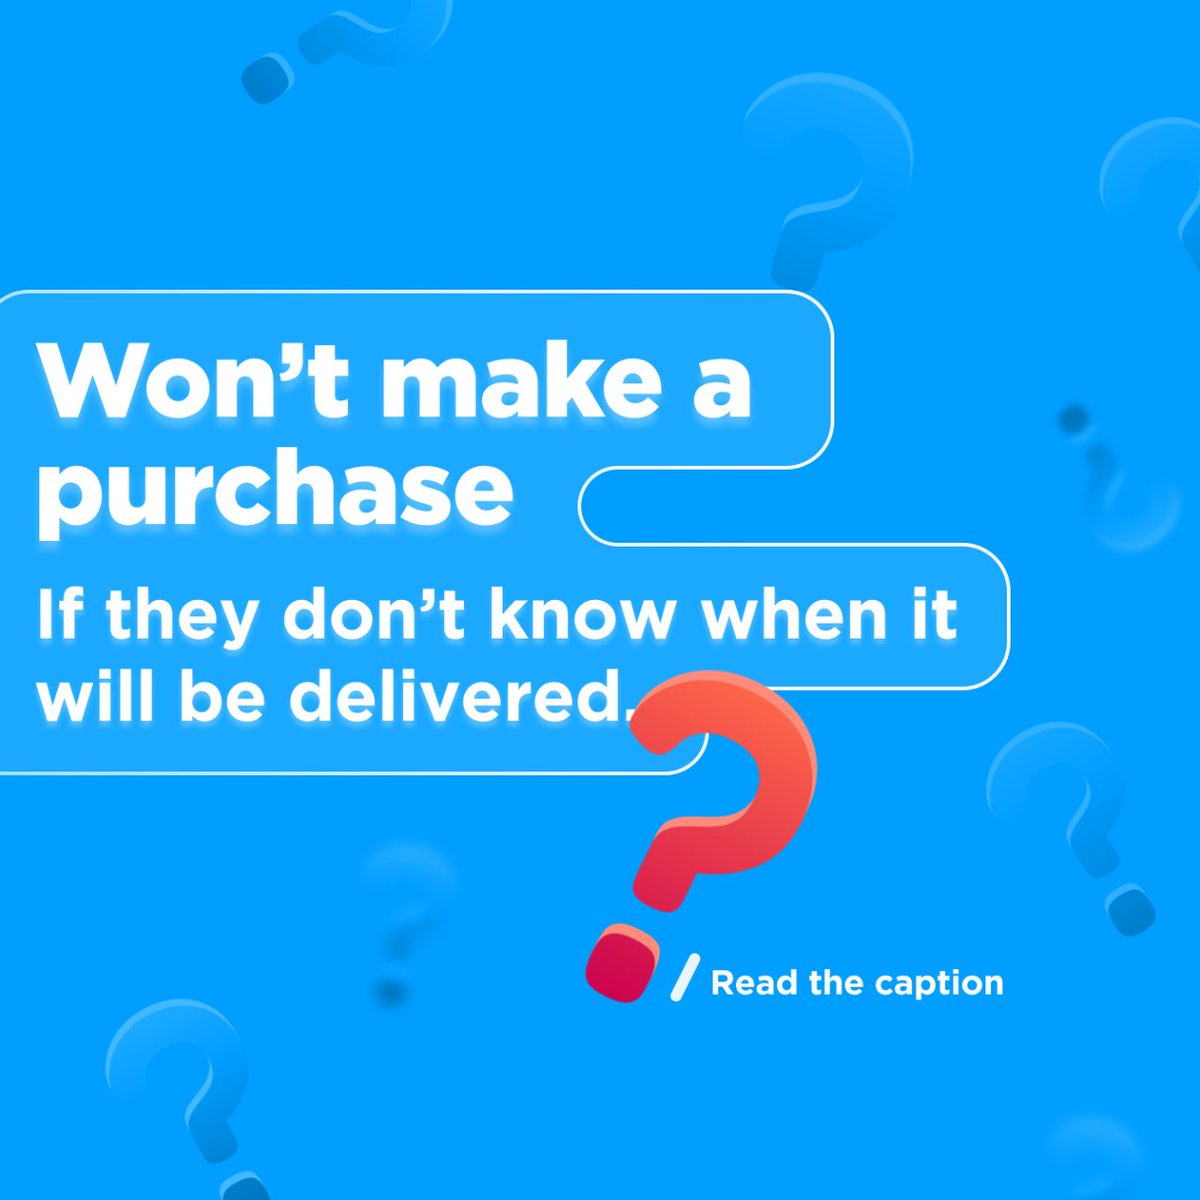 53% of shoppers ditch carts with delivery mystery! #Bearer delivers clarity & speed - happy customers guaranteed! #Courier #CourierService #DeliveryService #Delivery #doortodoordelivery #ParcelDelivery #MelbourneDelivery #Melbourne #Samedaydelivery #FastDelivery